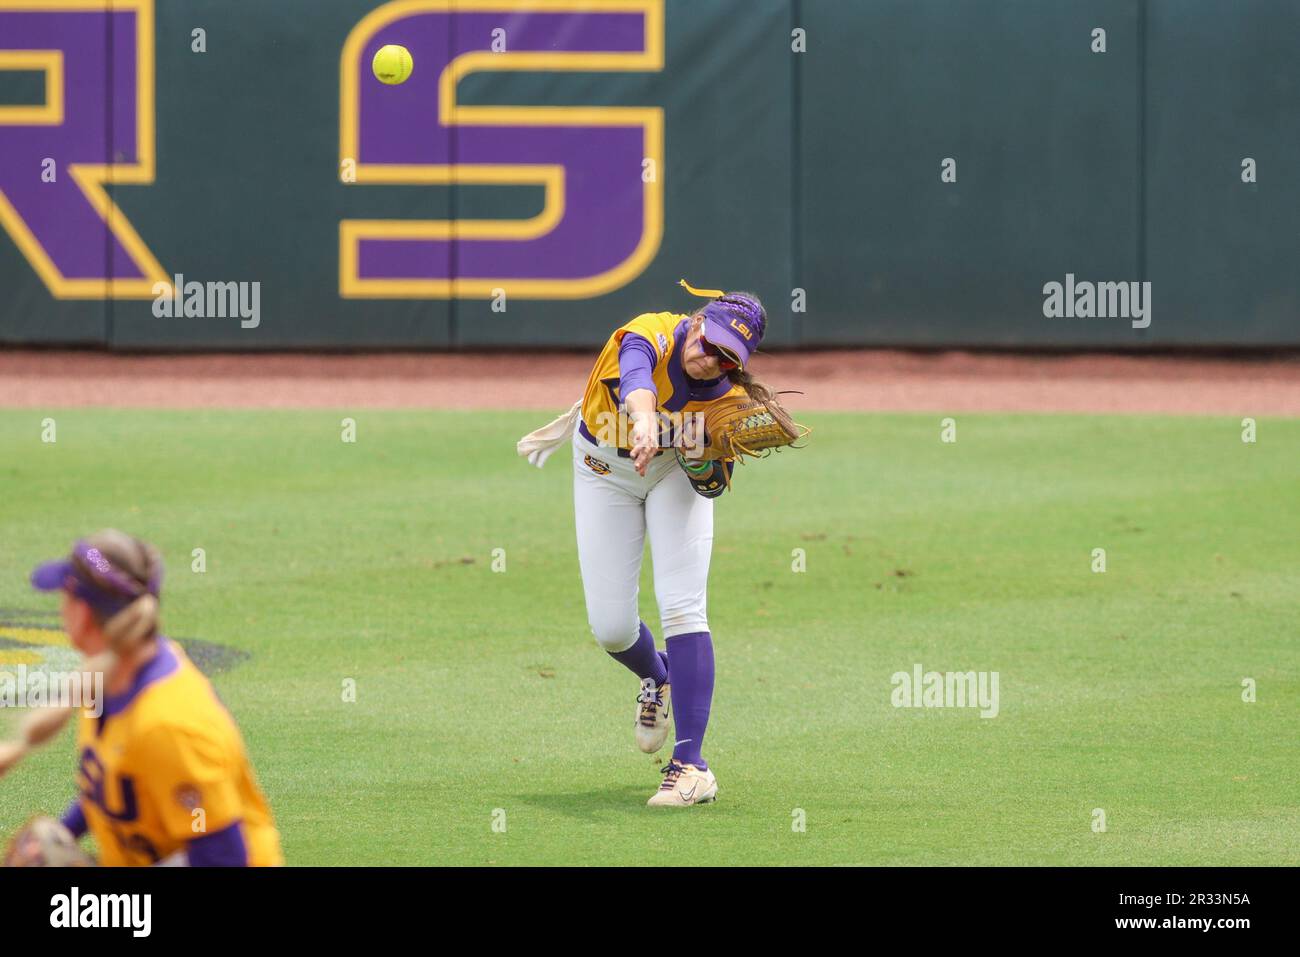 Baton Rouge, LA, USA. 21st May, 2023. LSU center fielder Ciara Briggs (88) makes a throw to home plate during NCAA Regional Softball action between the University of Louisiana at Lafayette Ragin' Cajuns and the LSU Tigers at Tiger Park in Baton Rouge, LA. Jonathan Mailhes/CSM/Alamy Live News Stock Photo